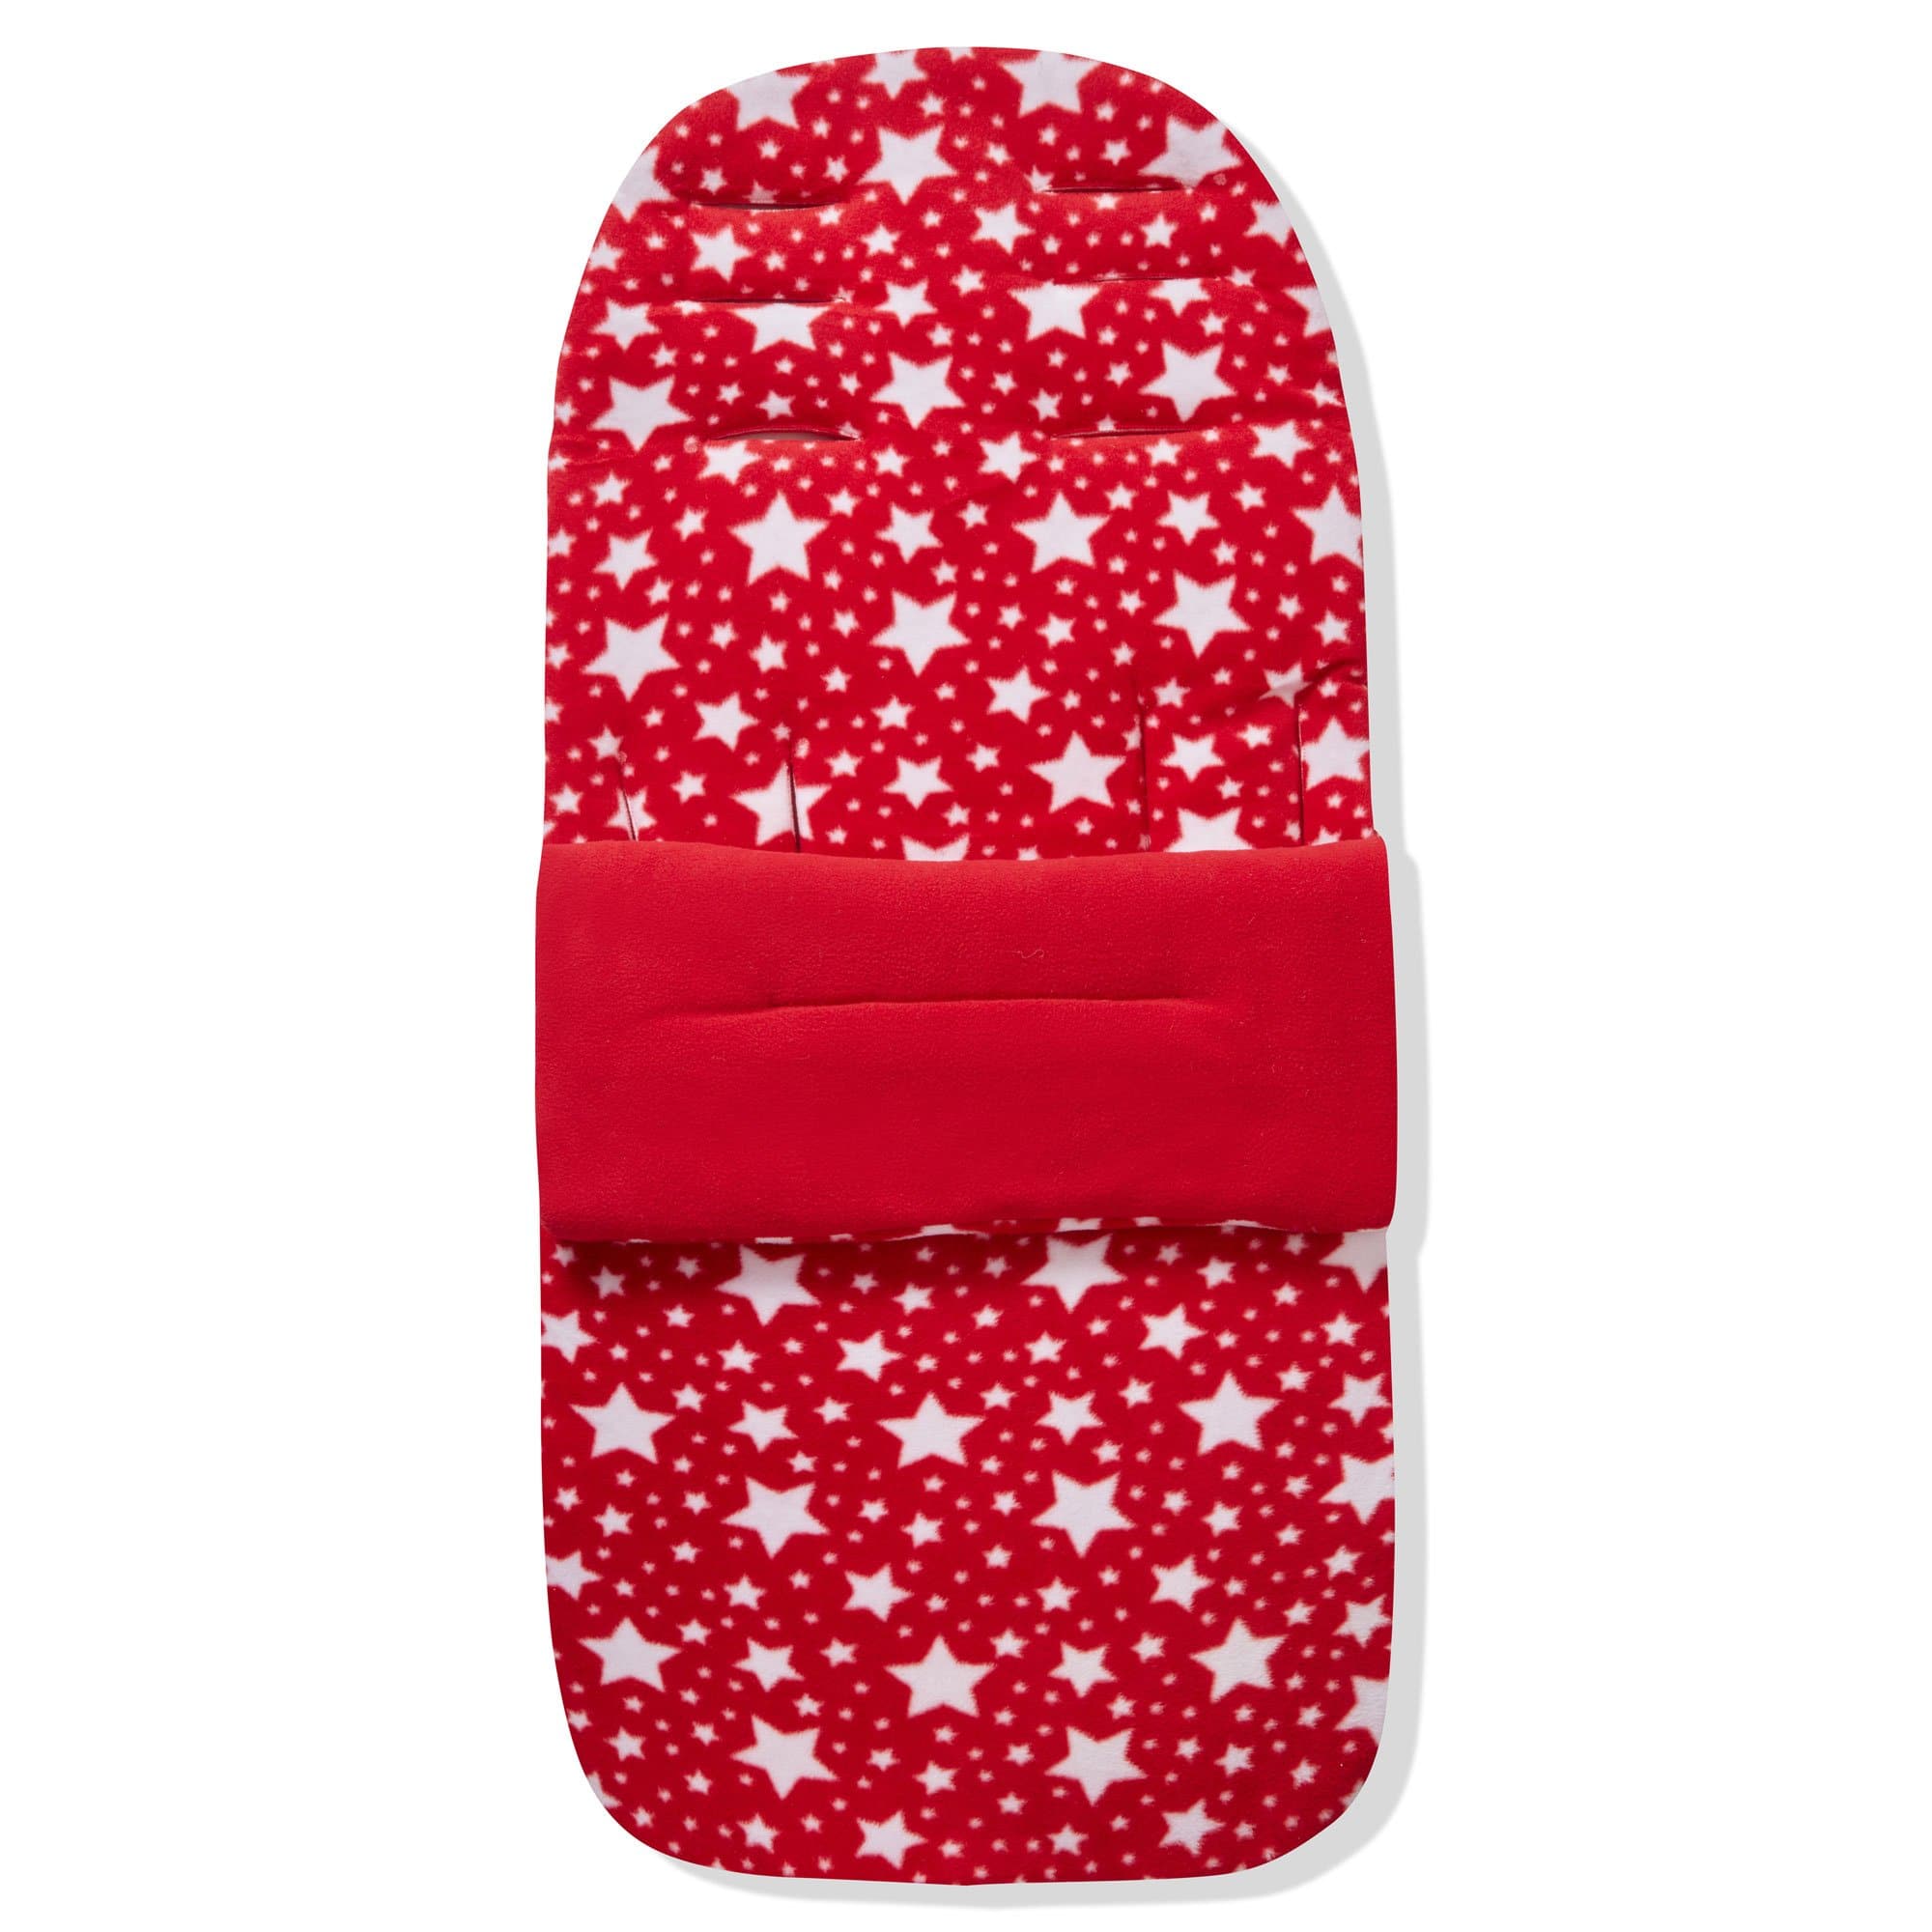 Fleece Footmuff / Cosy Toes Compatible with Joie - For Your Little One